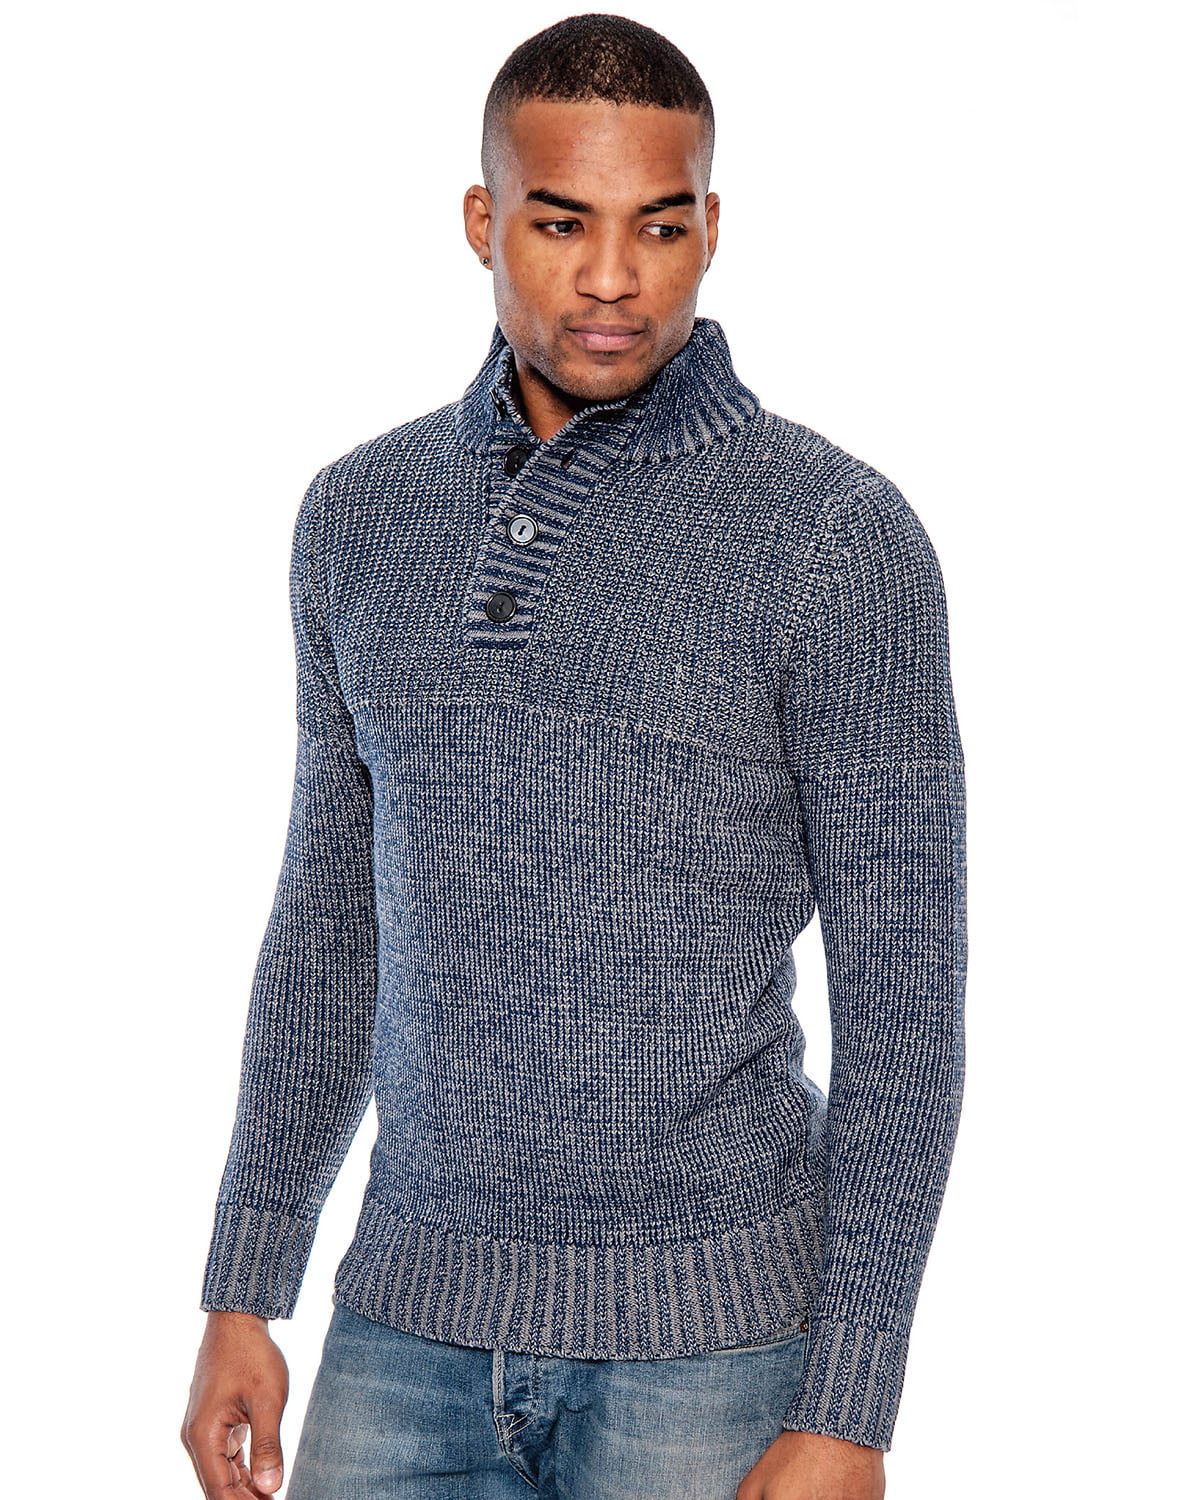 TR Men's Textured Rib Sweater with Placket by 9 Crowns Essentials (Navy ...